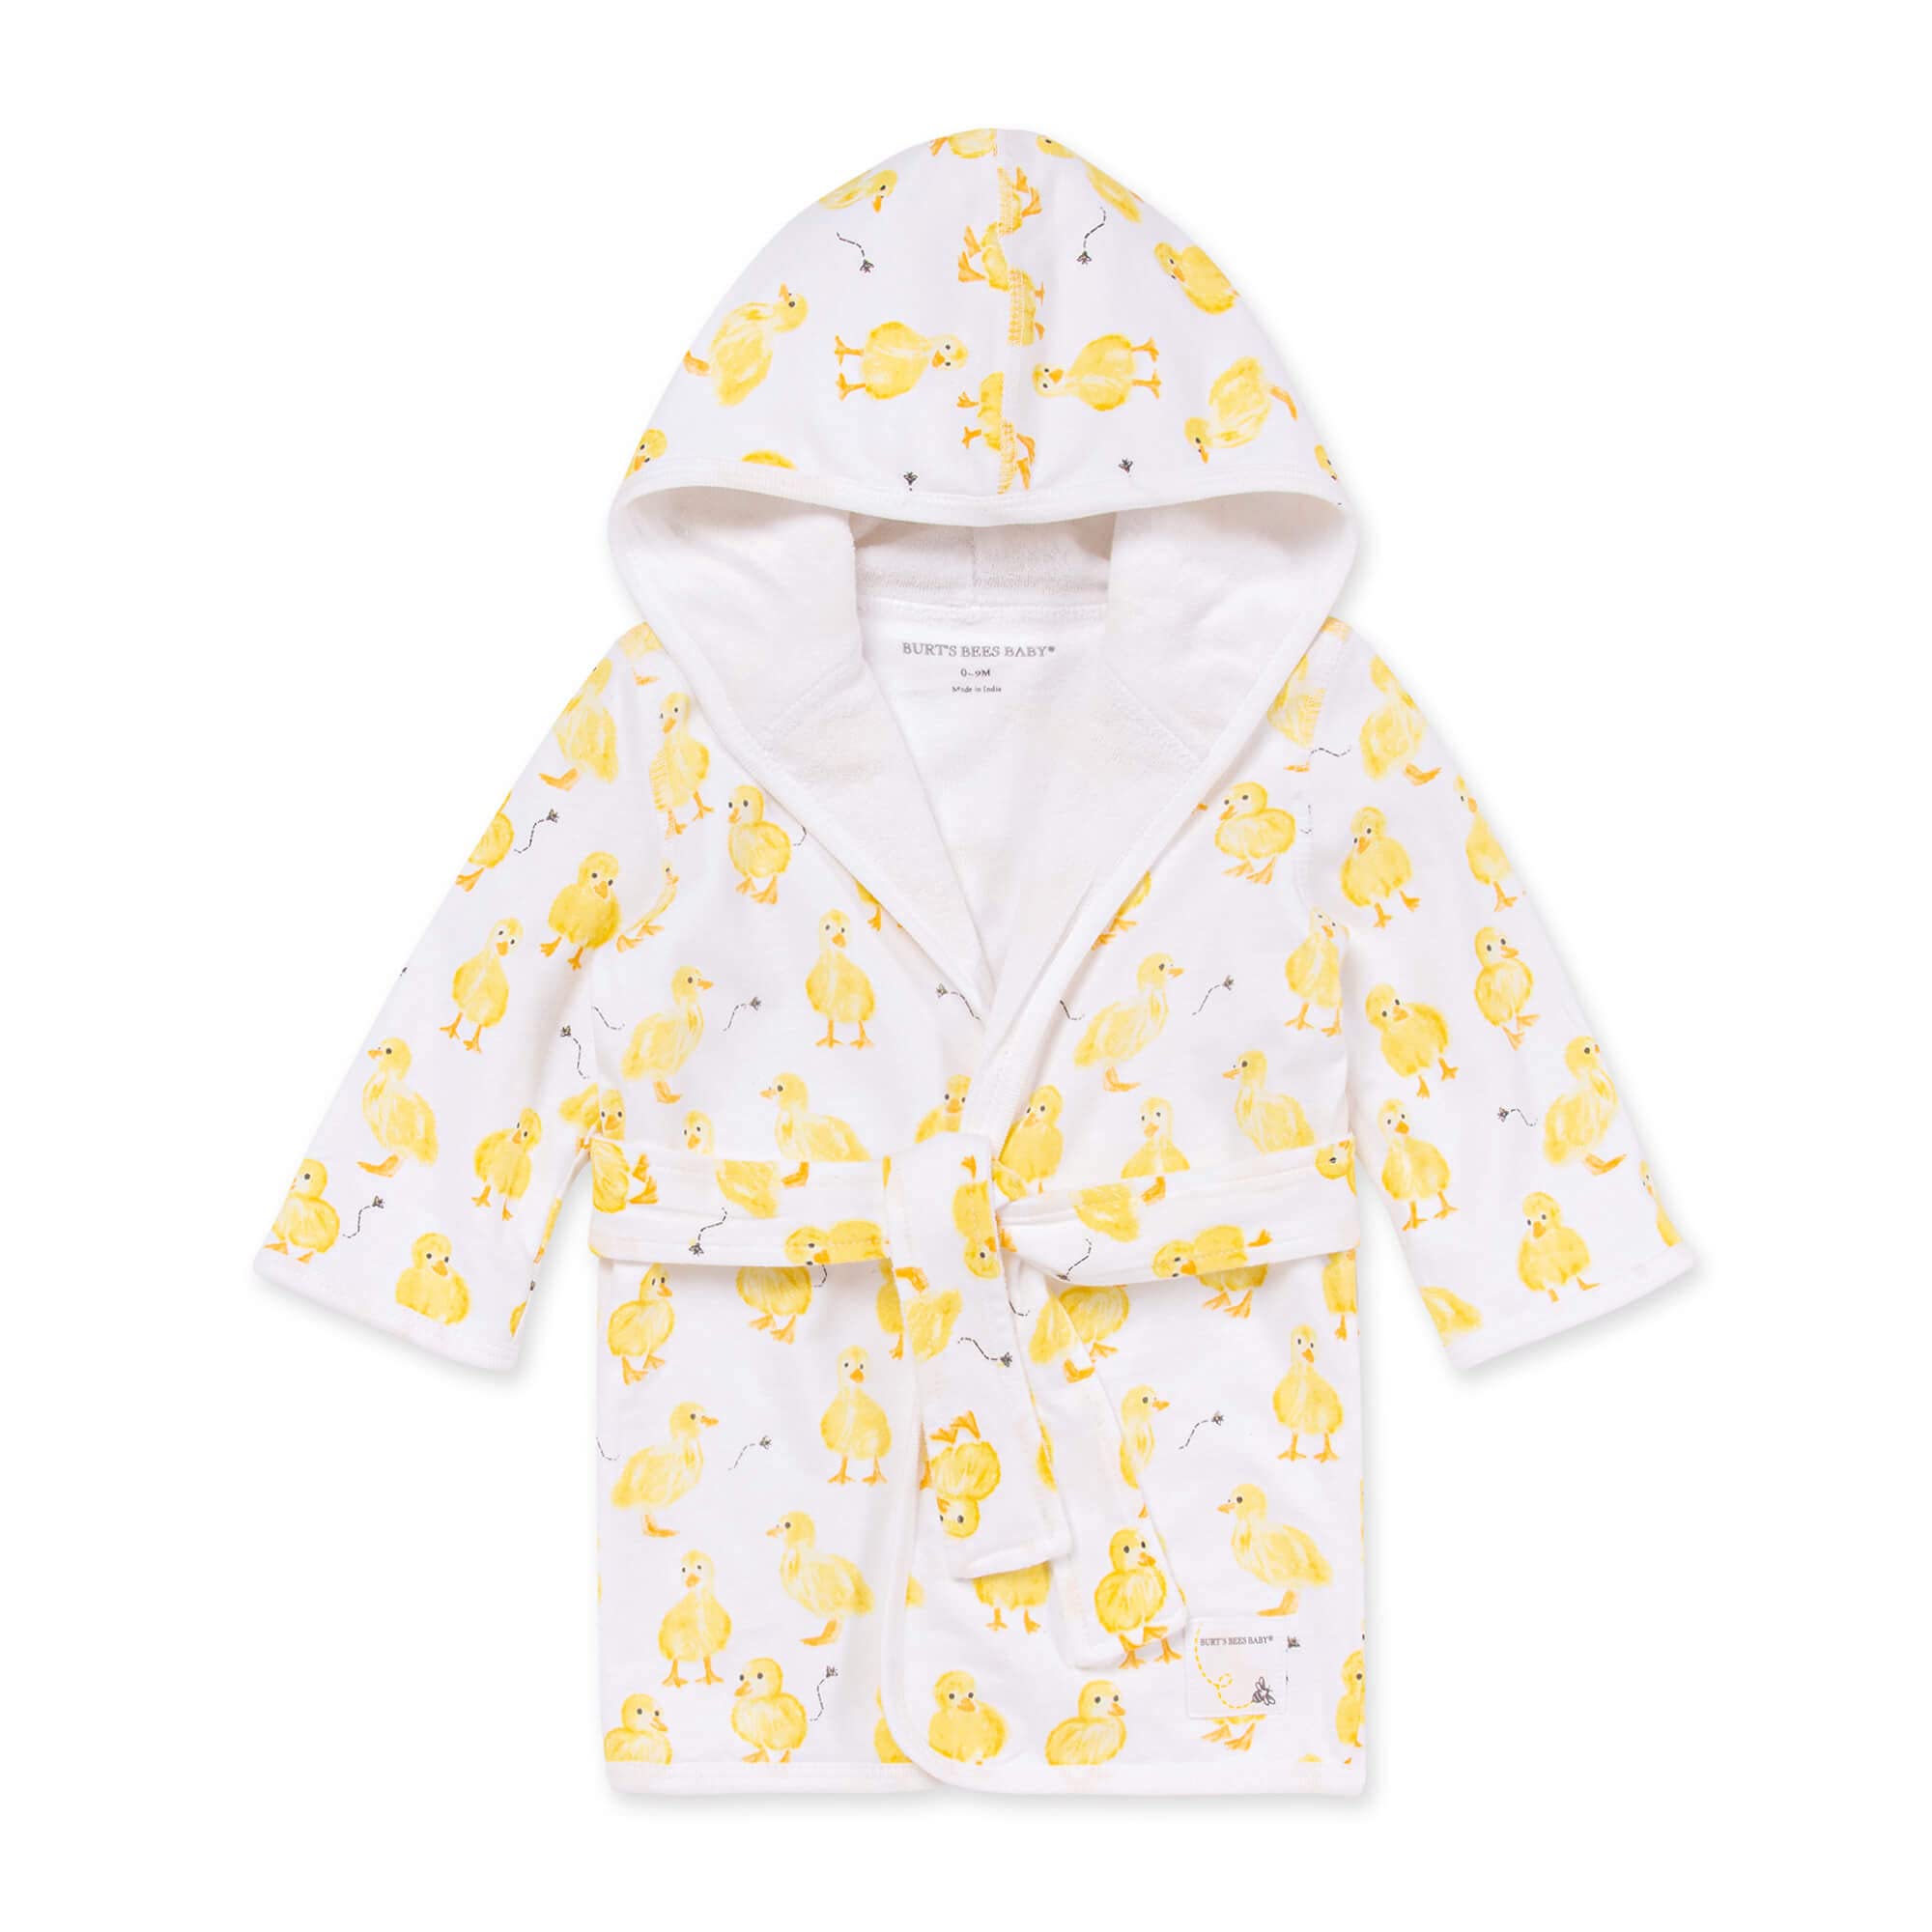 Burt's Bees Baby Infant Hooded Bathrobe, Absorbent Knit Terry, 100% Organic Cotton, Yellow, 0-9 Months